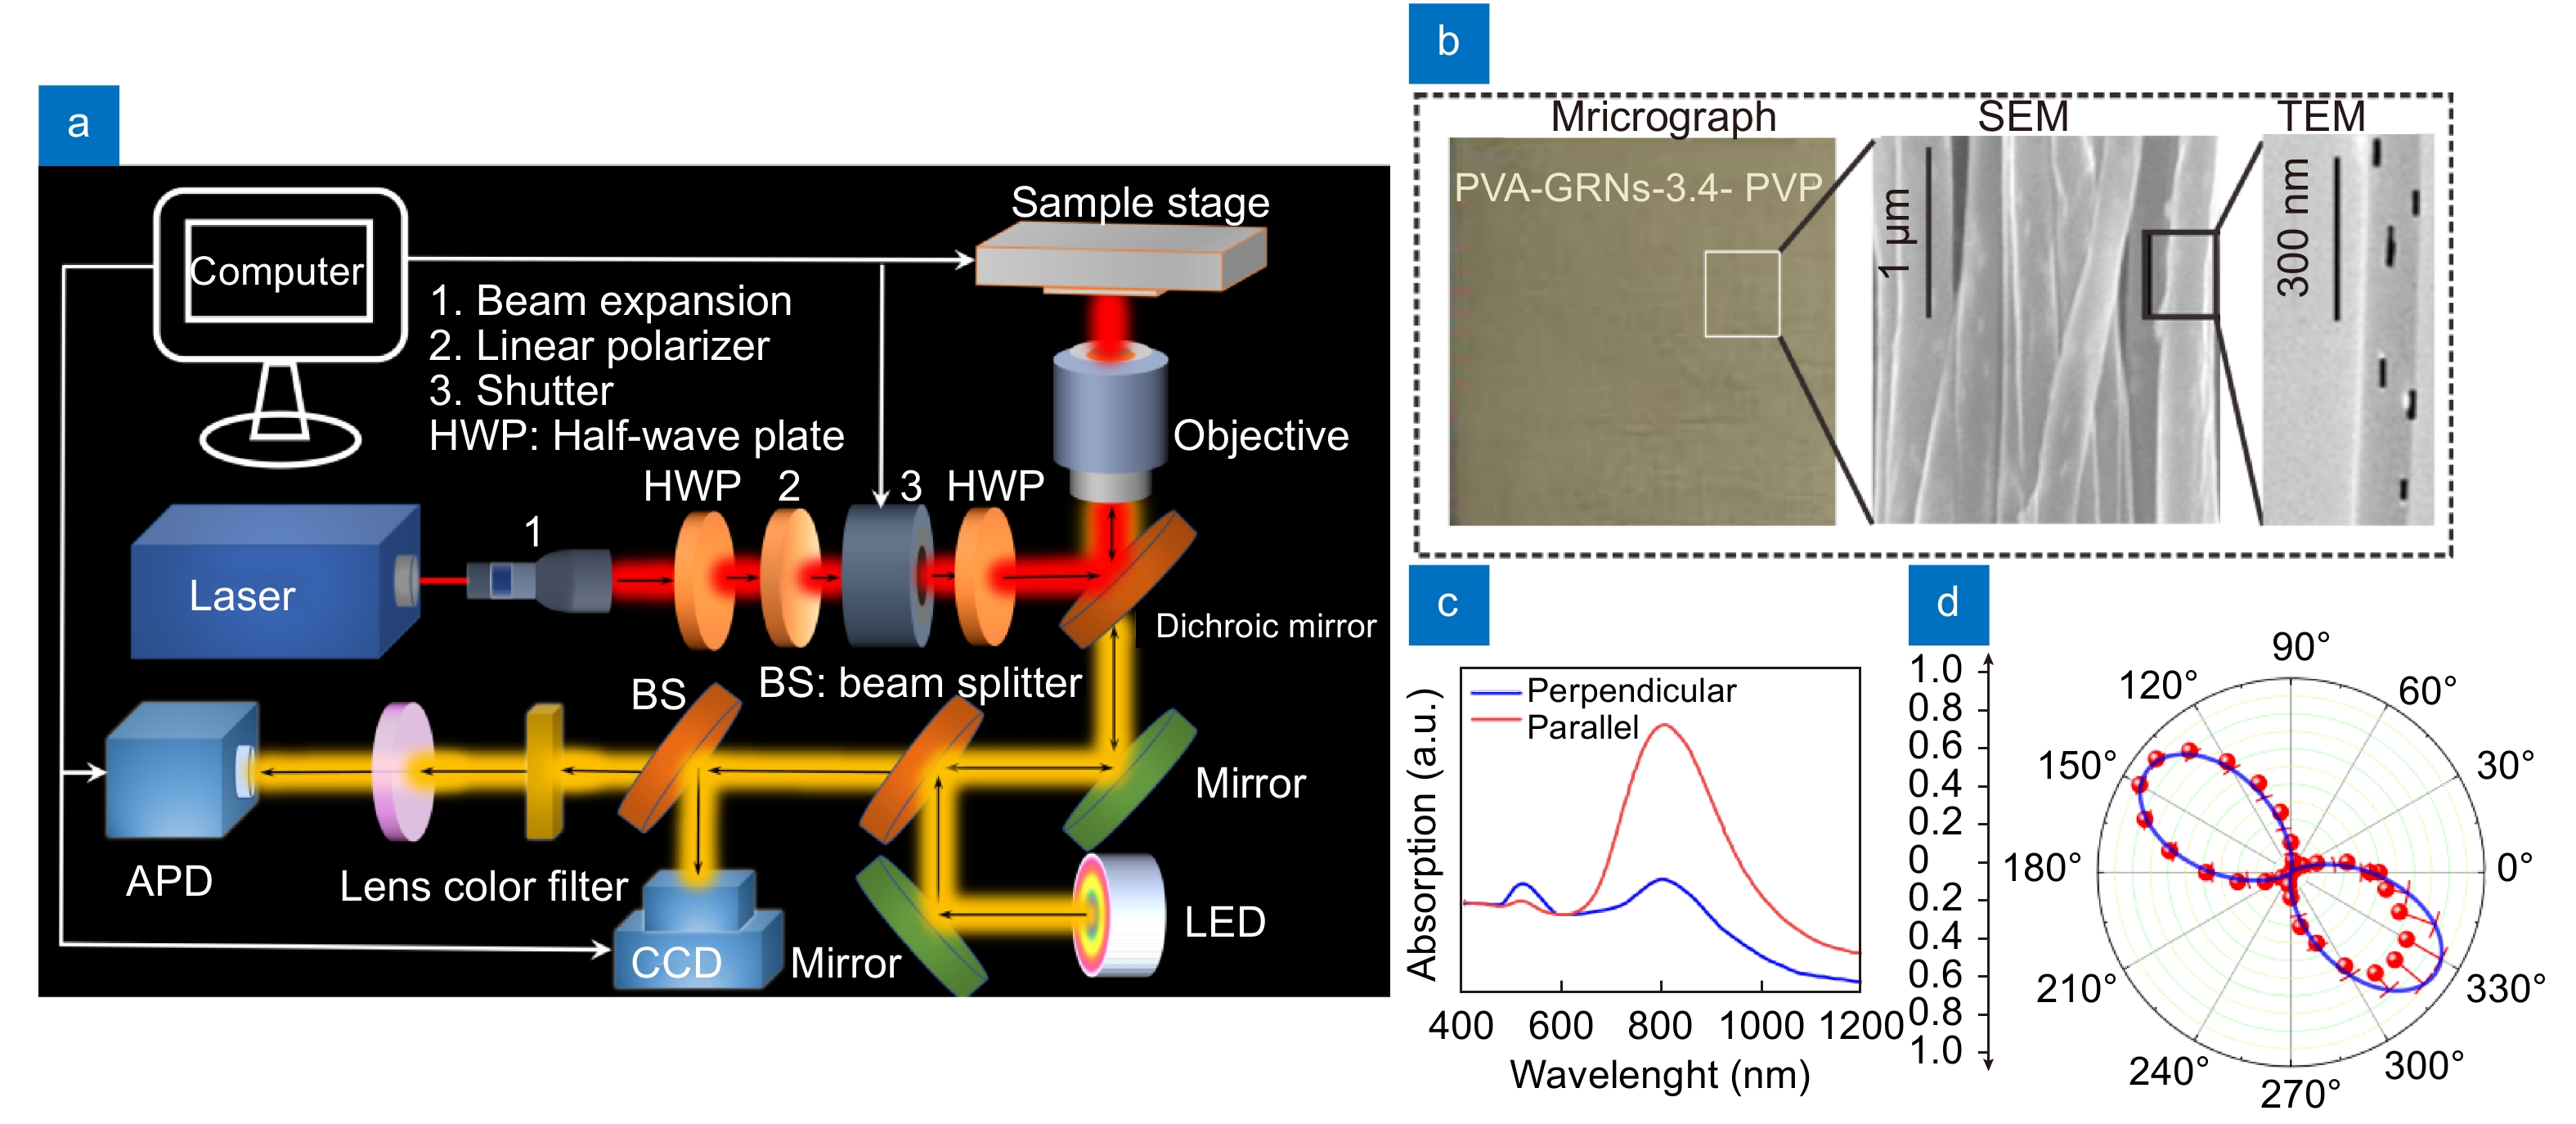 (a) Schematic drawing of the optical setup for the multilayered optical data storage. (b) The optical microscope image of the data storage medium. The insets show SEM image of the aligned nanofibers and the TEM image of a single nanofiber, respectively. (c) Absorption spectrum of the nanocomposite film at different polarization of excitation light. (d) TPL polarization sensitivity of the sample excited by the corresponding wavelength. Red circles are experimental data of TPL intensities. The blue curve is the fittings with biquadratic cosine functions.